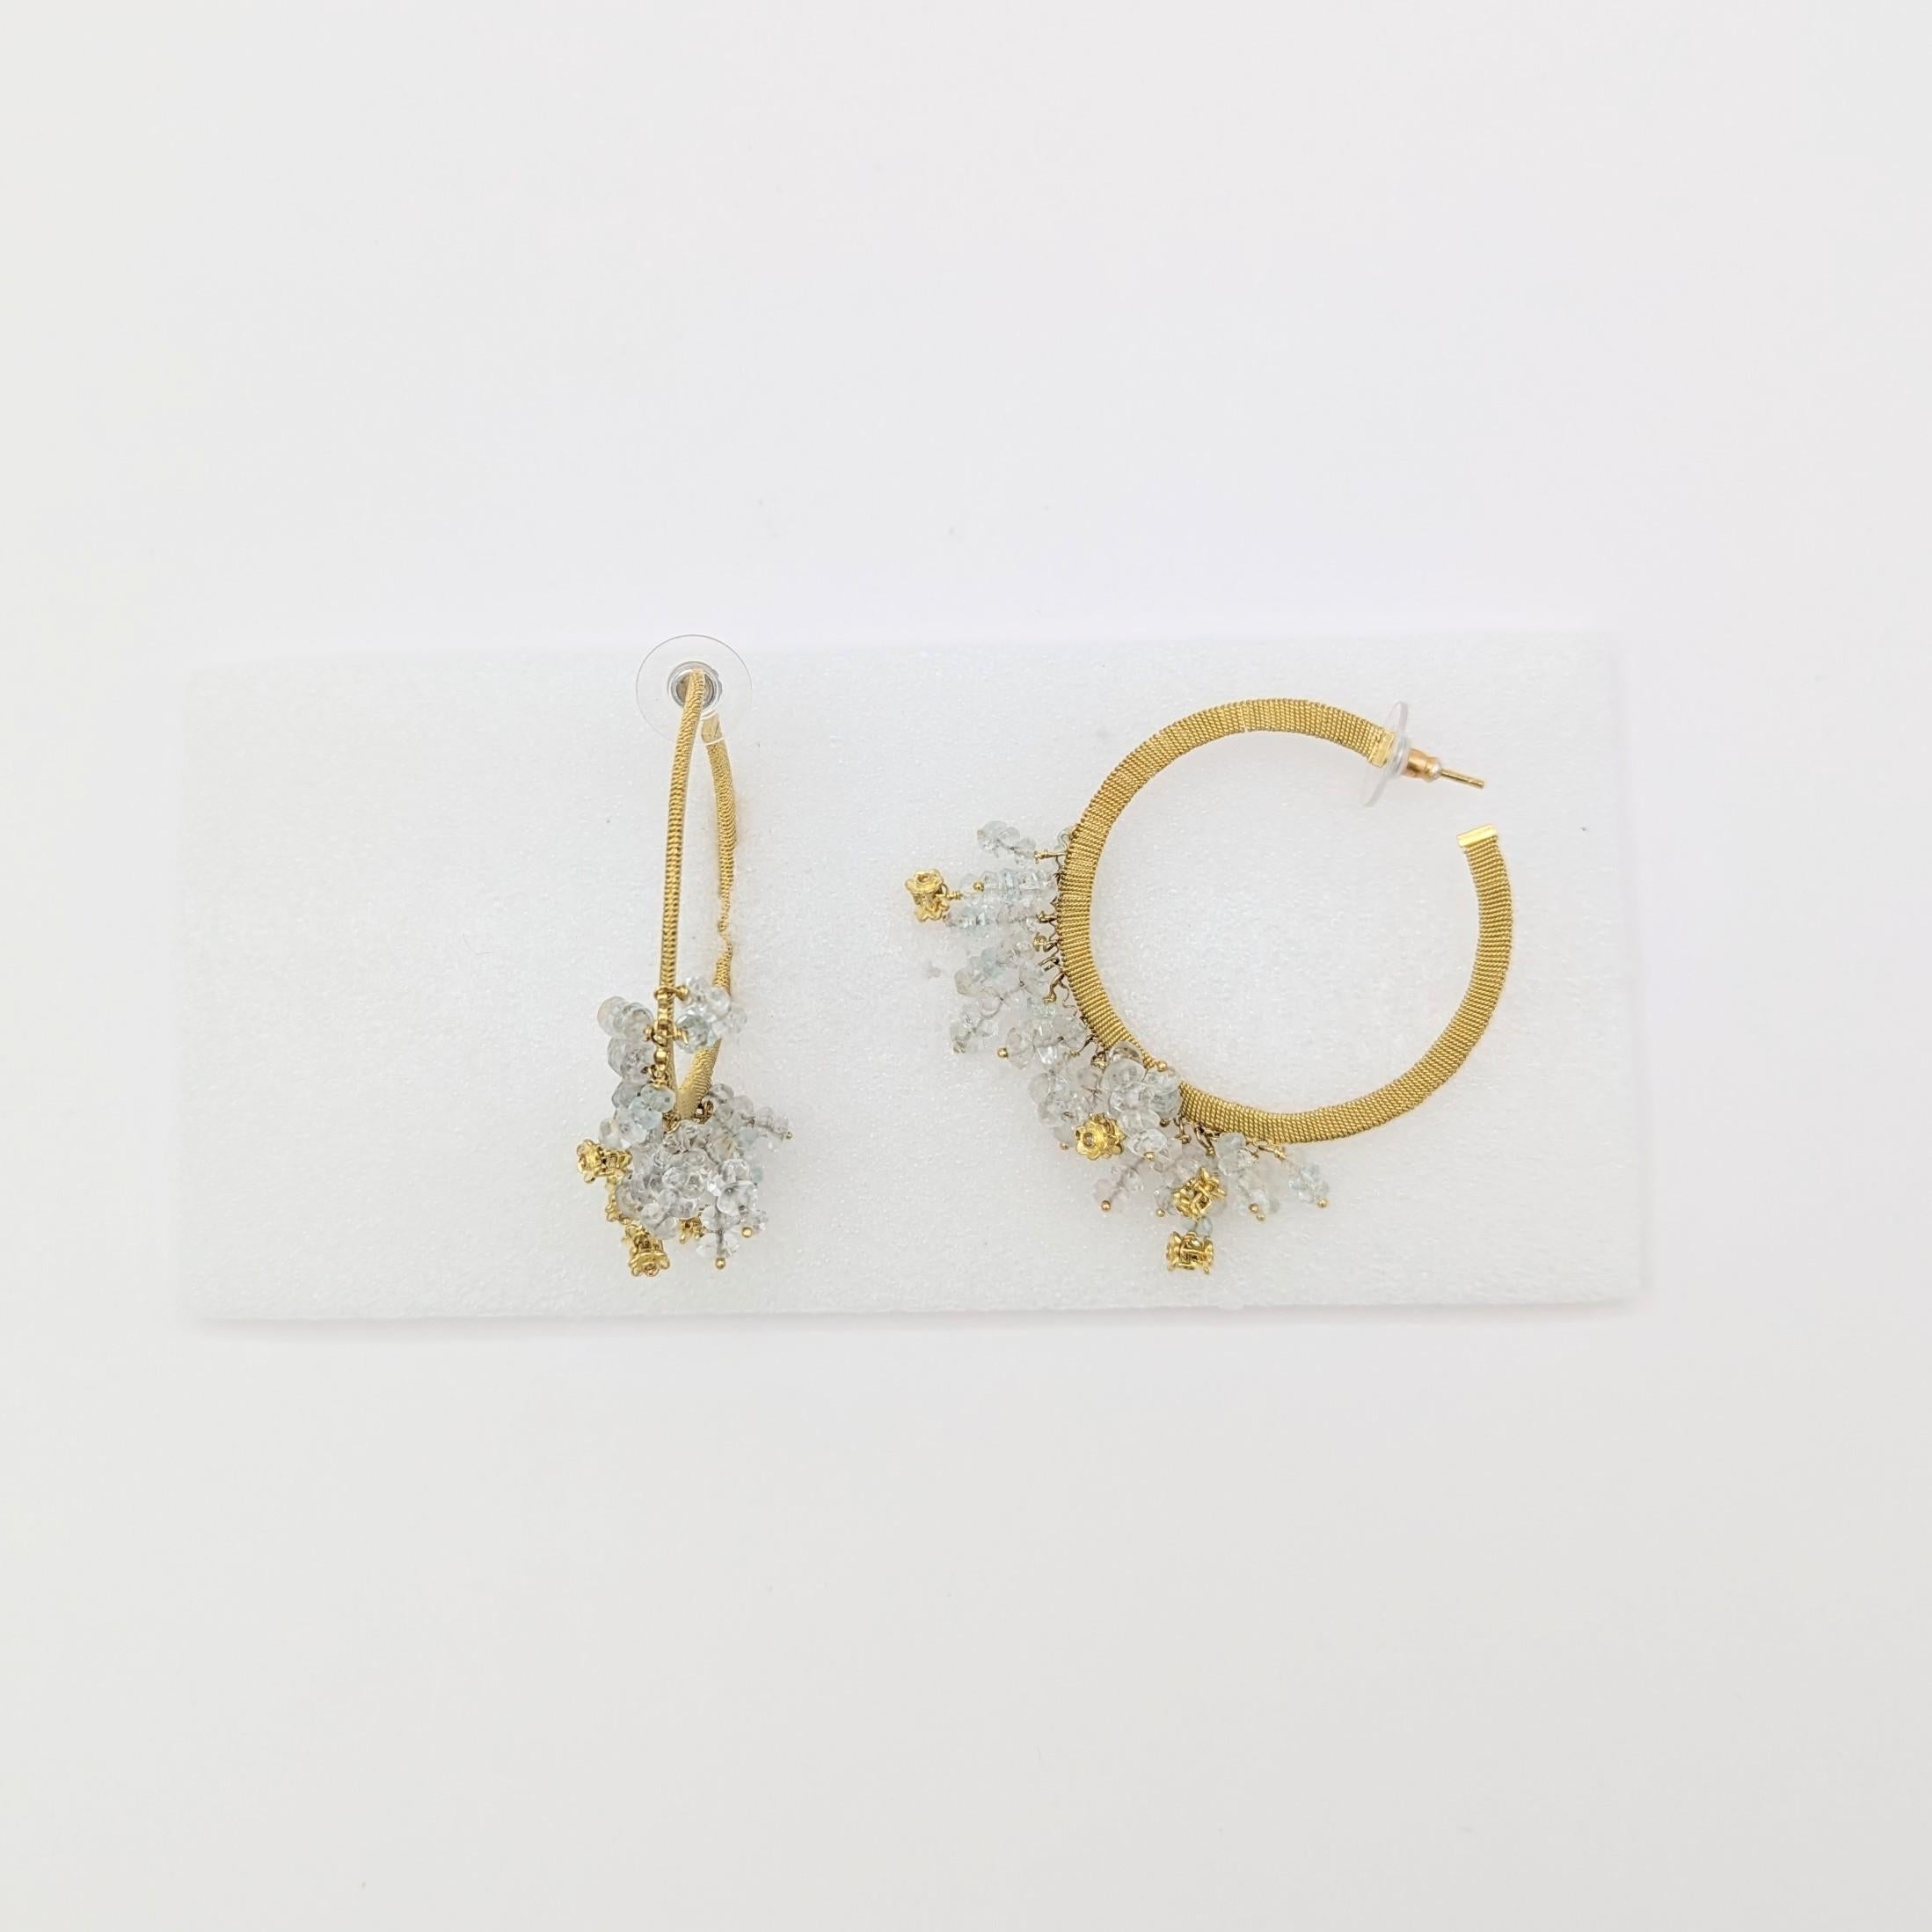 Crystal Dangle Hoop Earrings in 14K Yellow Gold In New Condition For Sale In Los Angeles, CA